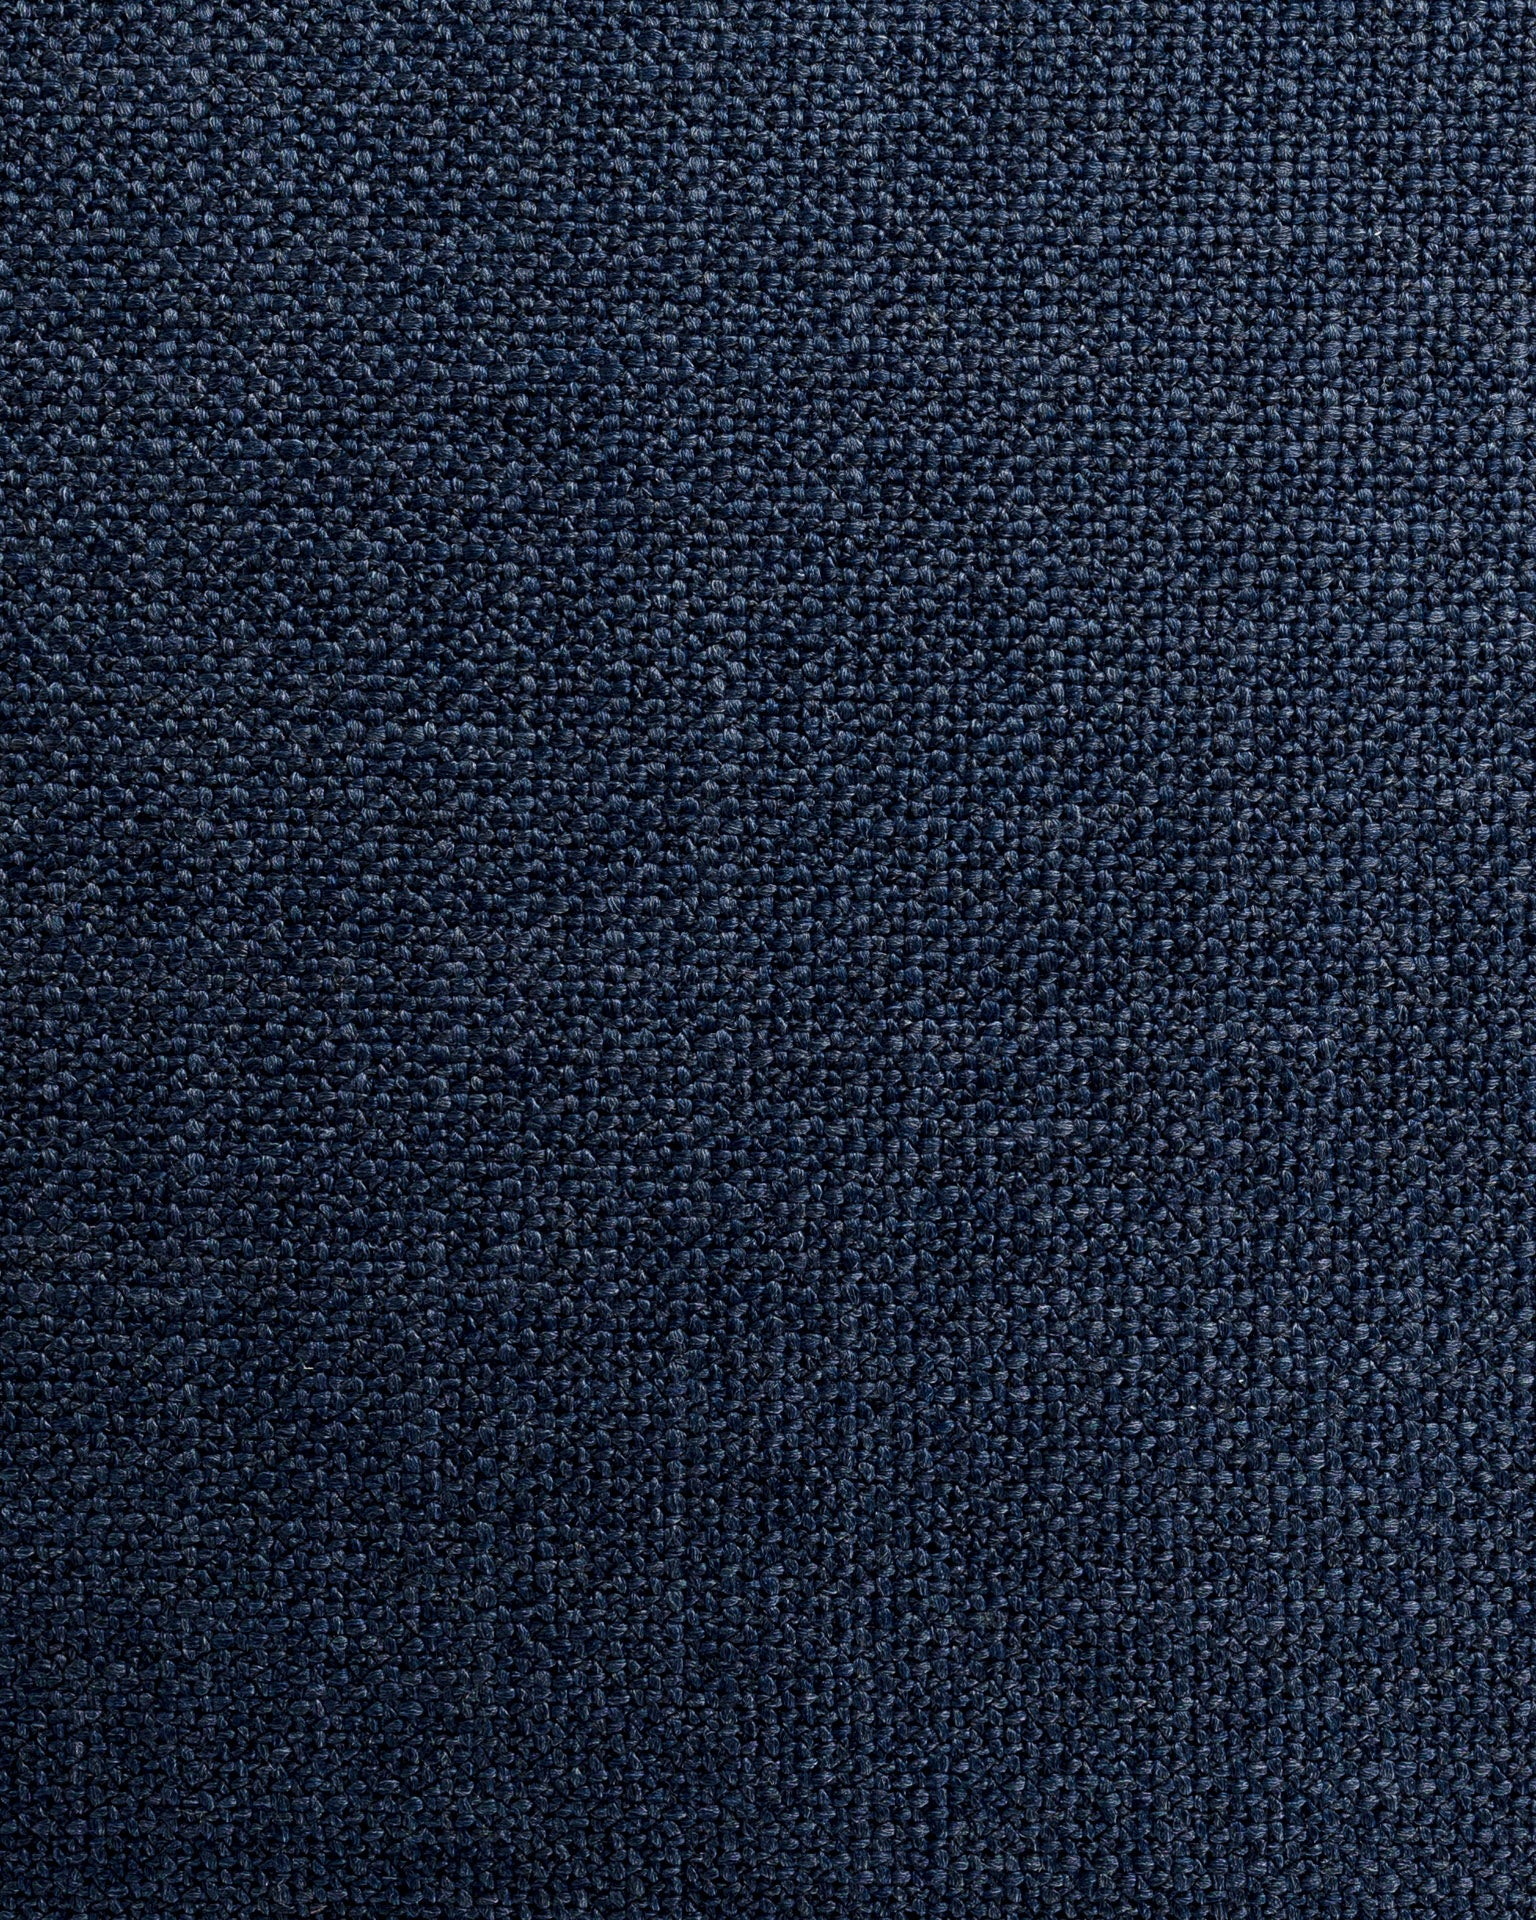 Close-up texture of a dark blue denim fabric, showing detailed Arizona-style weave patterns with visible threads in varying shades of blue Gabby Bermuda Blue Pillow 26x26.